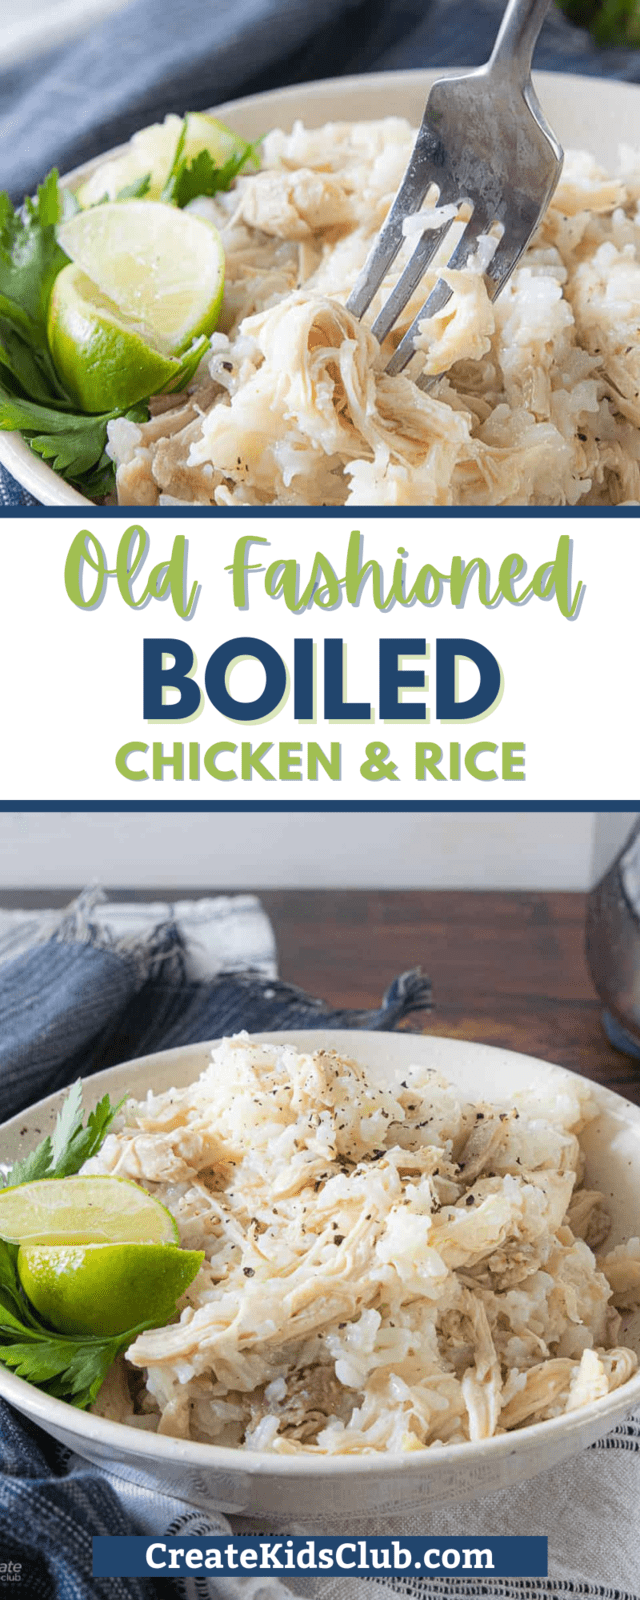 Old Fashioned Boiled Chicken and Rice